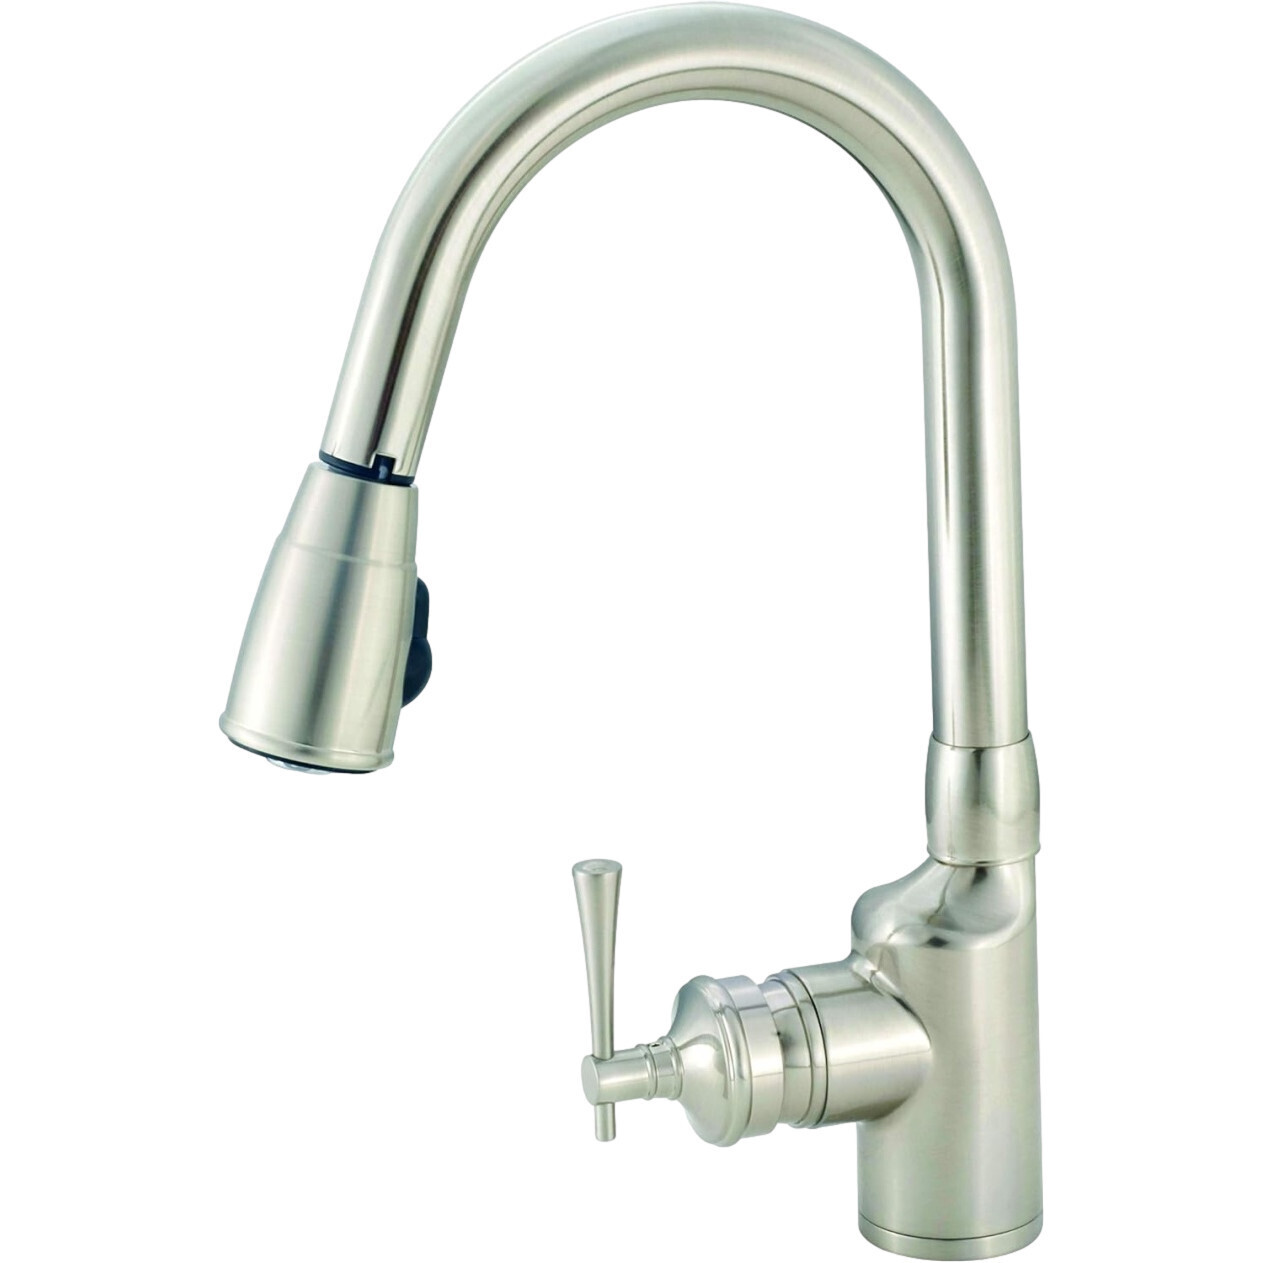 8" Single Lever Kitchen Faucet W/Gooseneck Pull Down Spout Brushed Nickel (SL2000N)